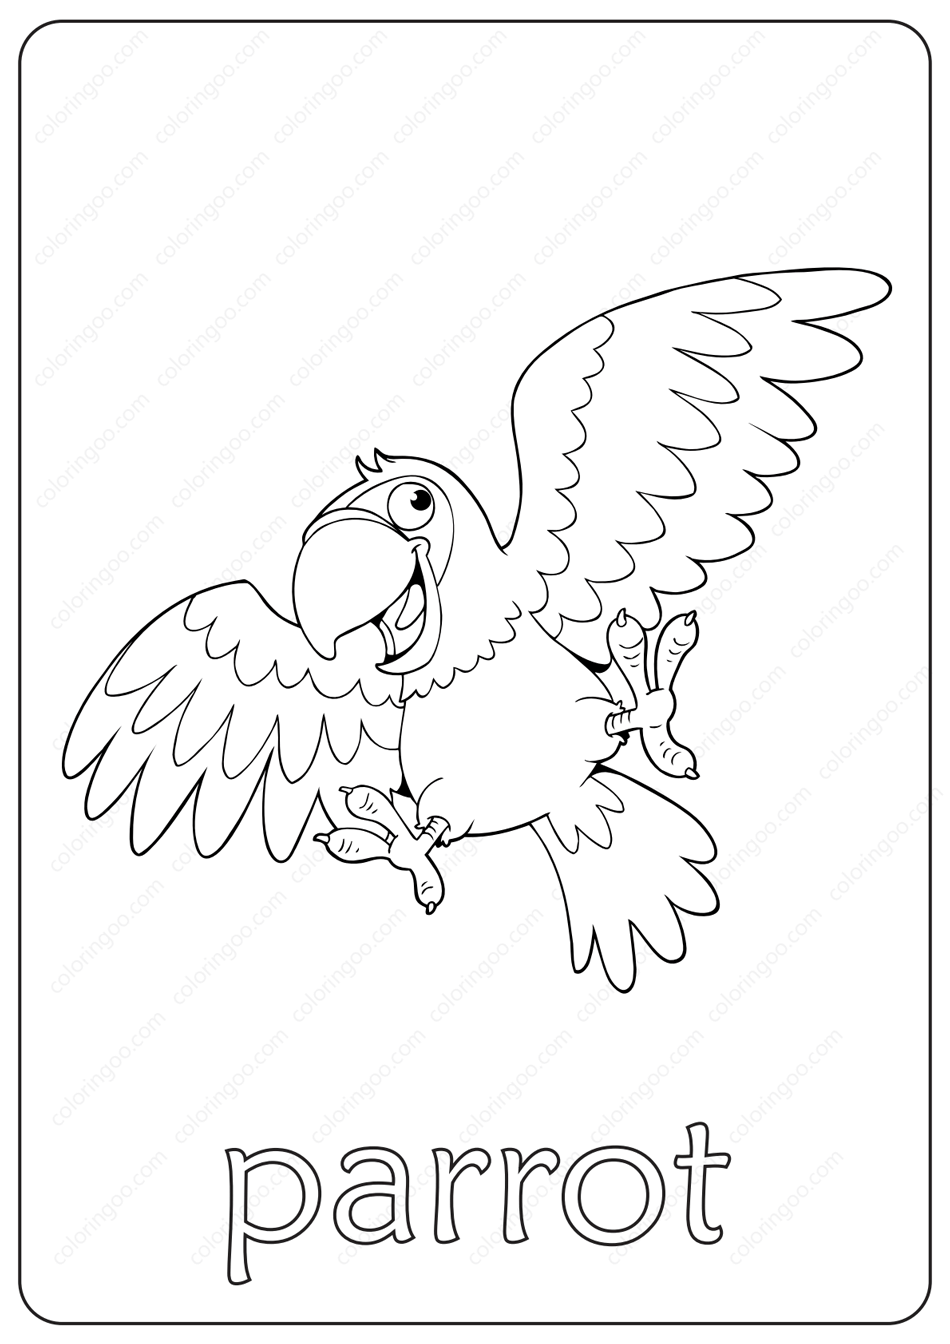 Printable Parrot Coloring Page – Book PDF